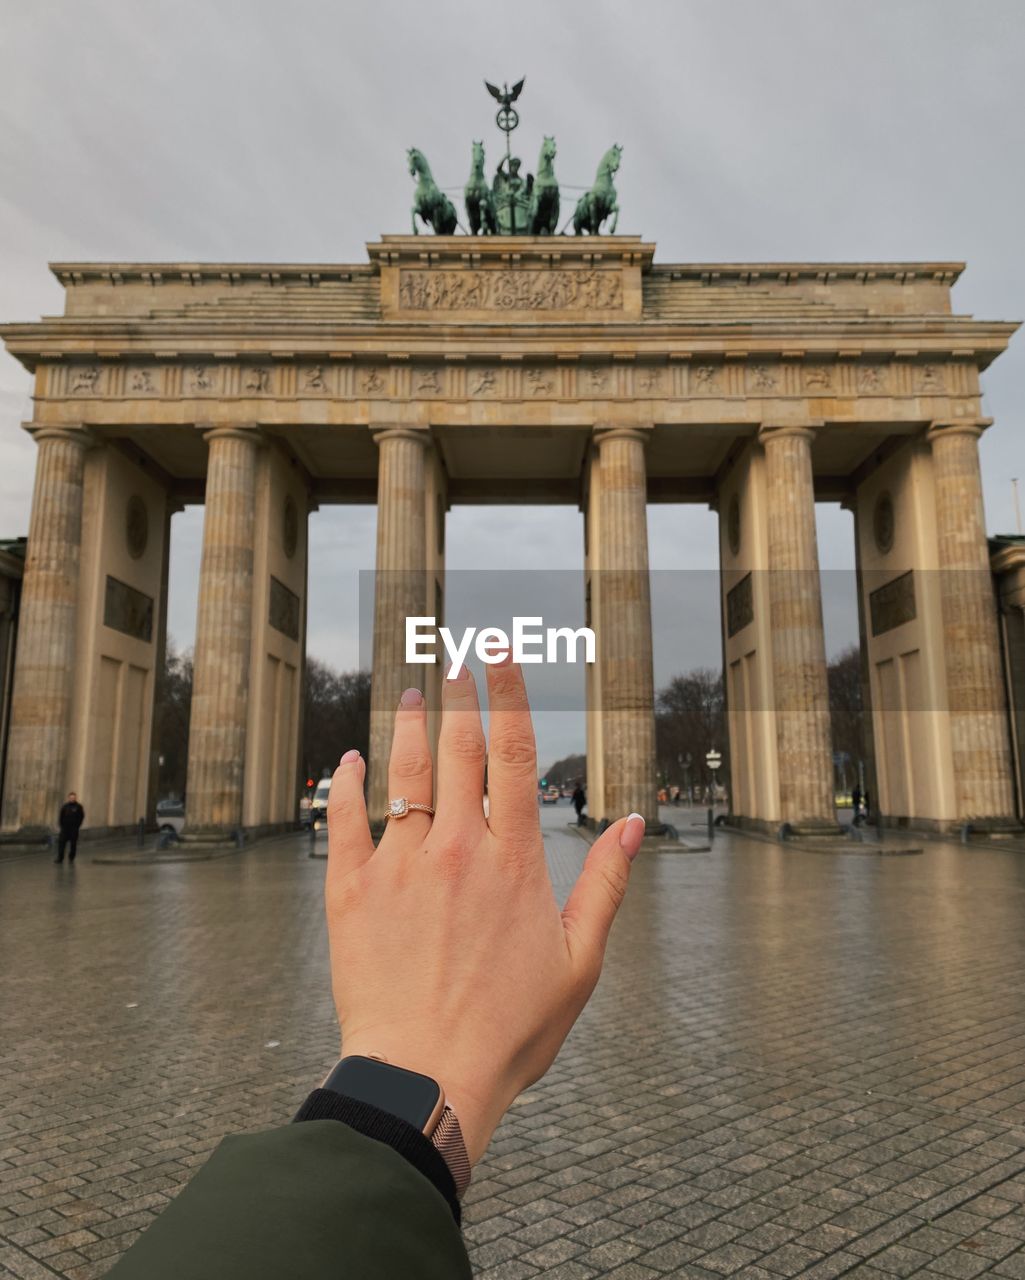 CROPPED IMAGE OF PERSON HAND HOLDING HISTORICAL BUILDING IN WATER